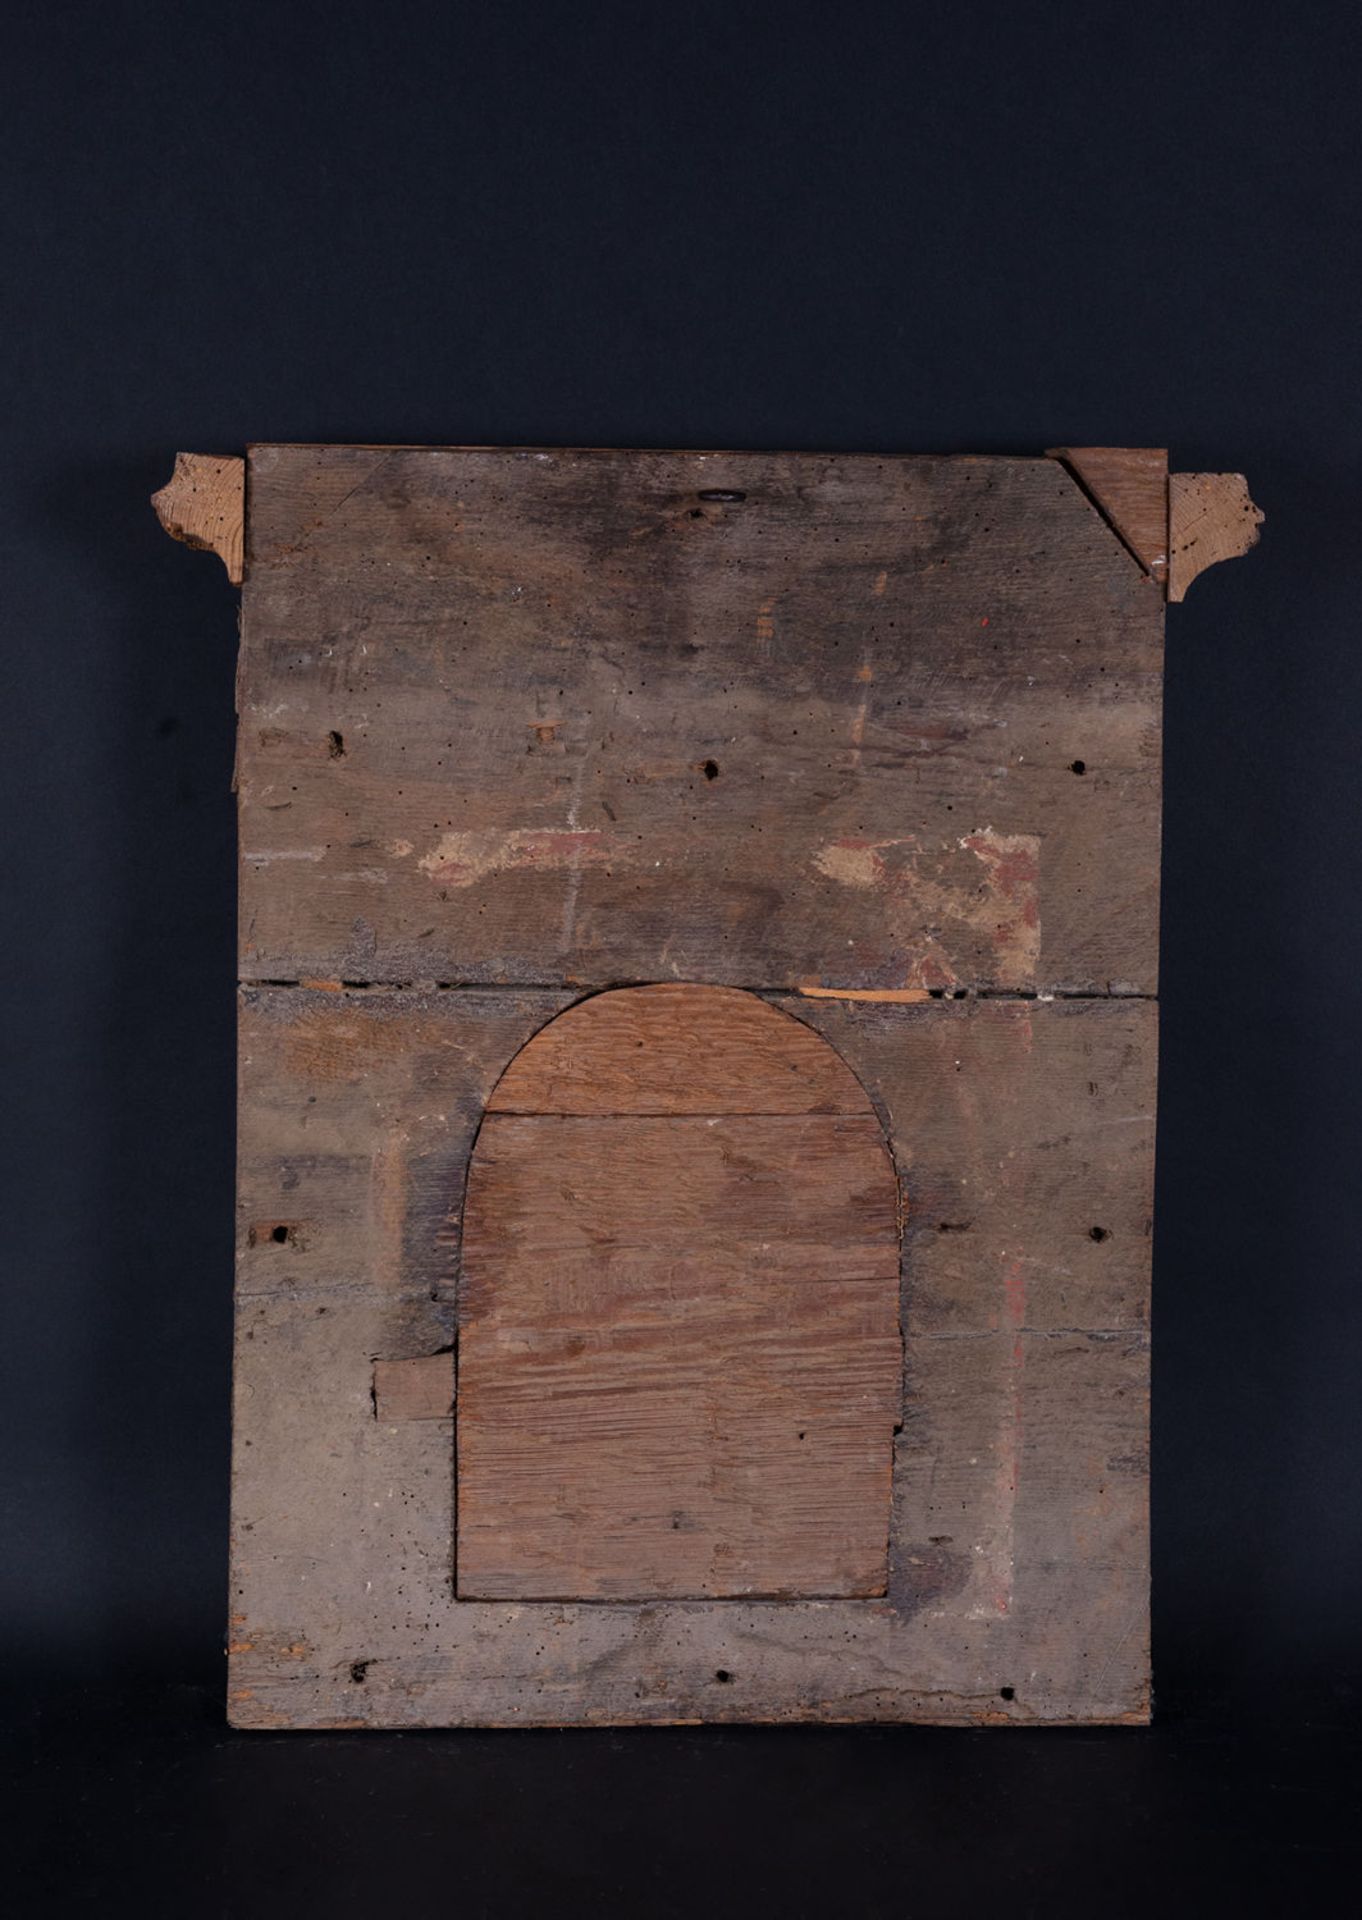 Gothic Tabernacle Door transformed into frame, 14th - 15th centuries - Image 2 of 2